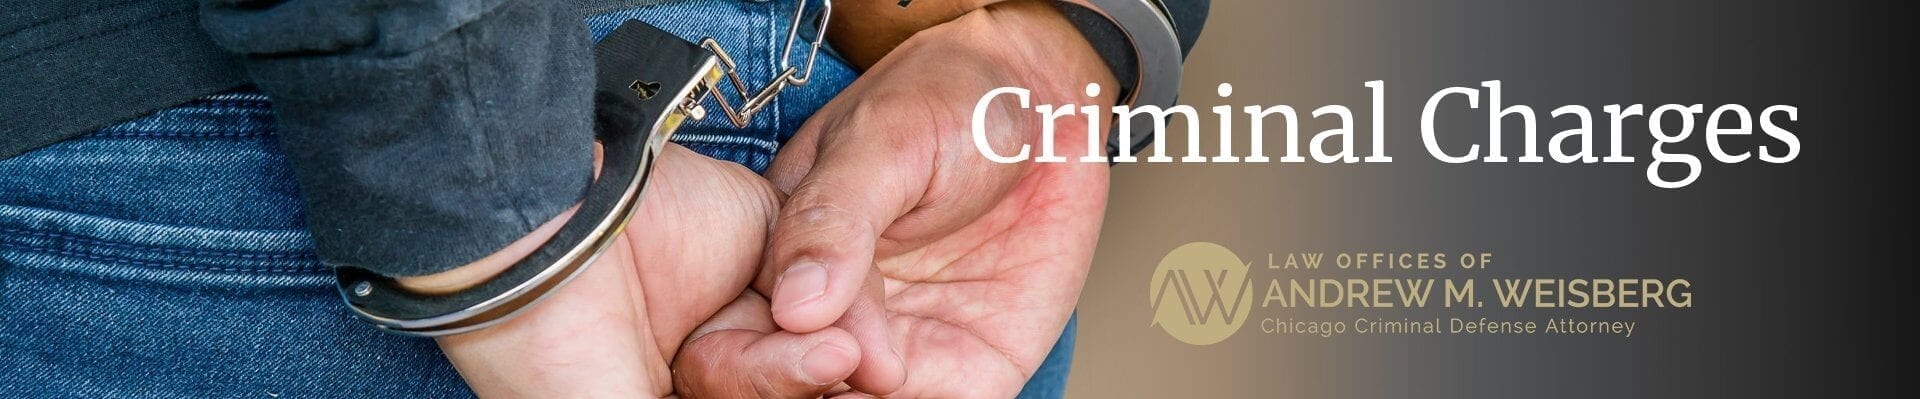 Criminal Charges in Illinois